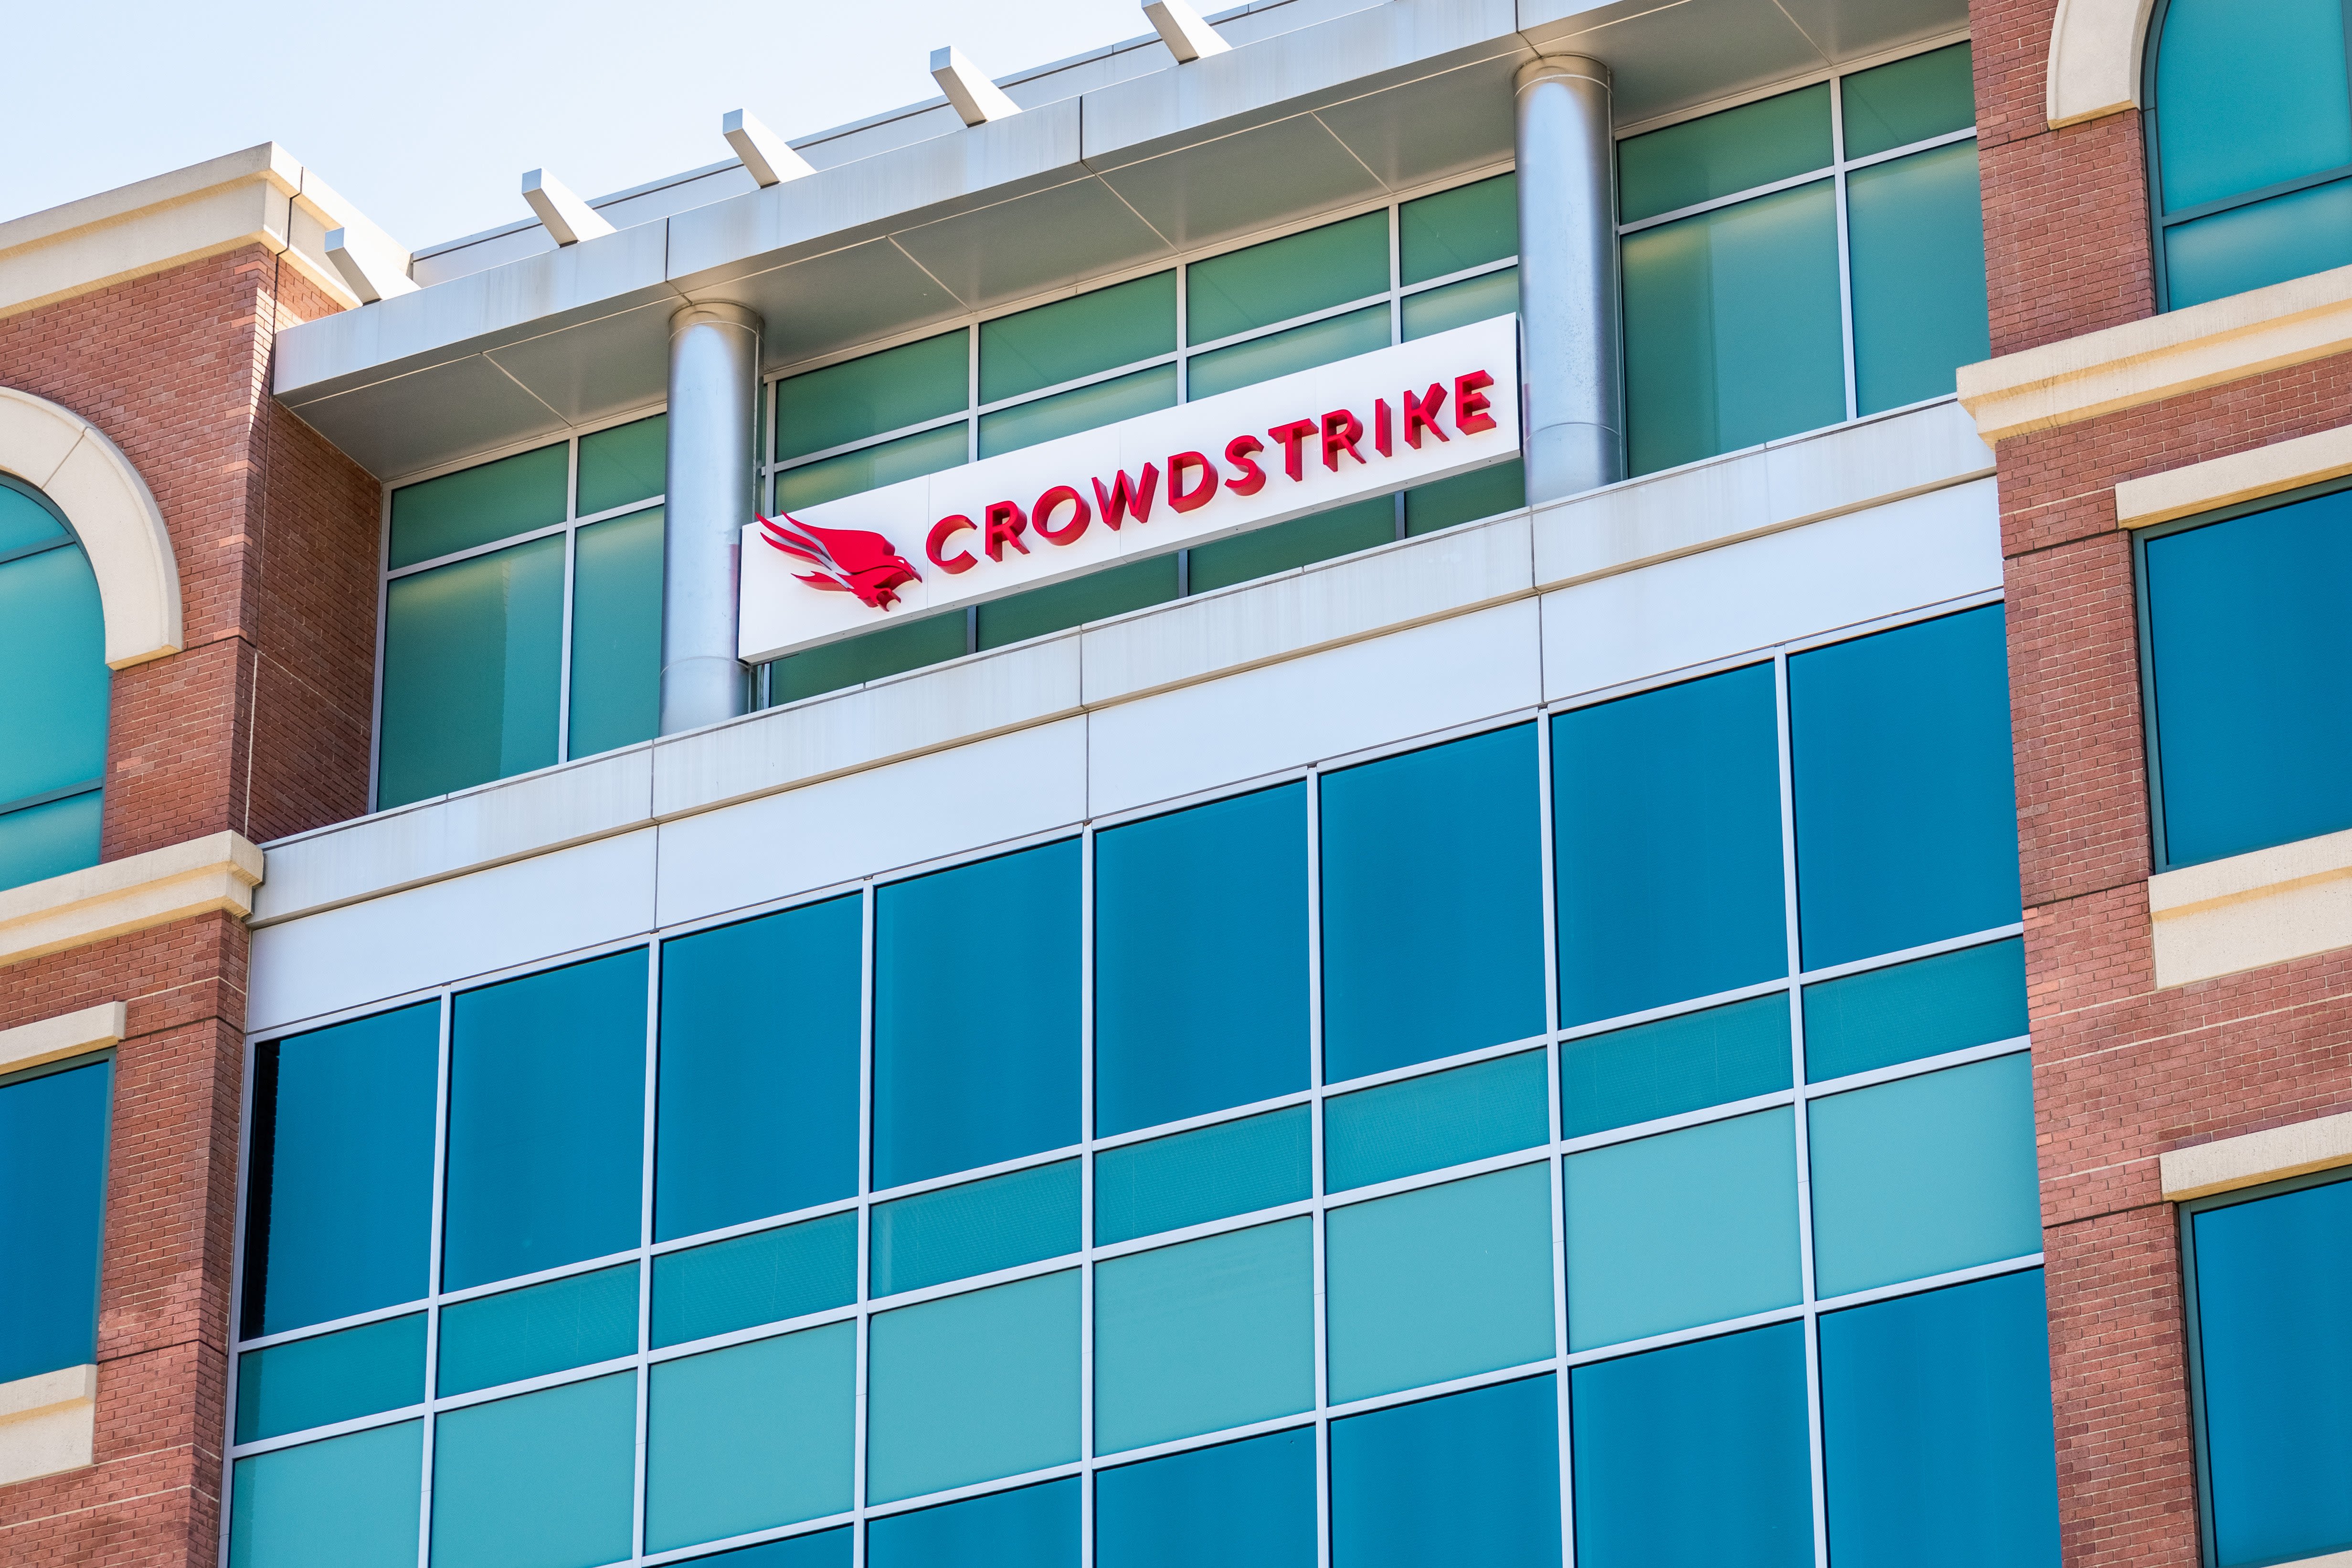 How did one CrowdStrike mistake stop the world? We asked 3 experts.